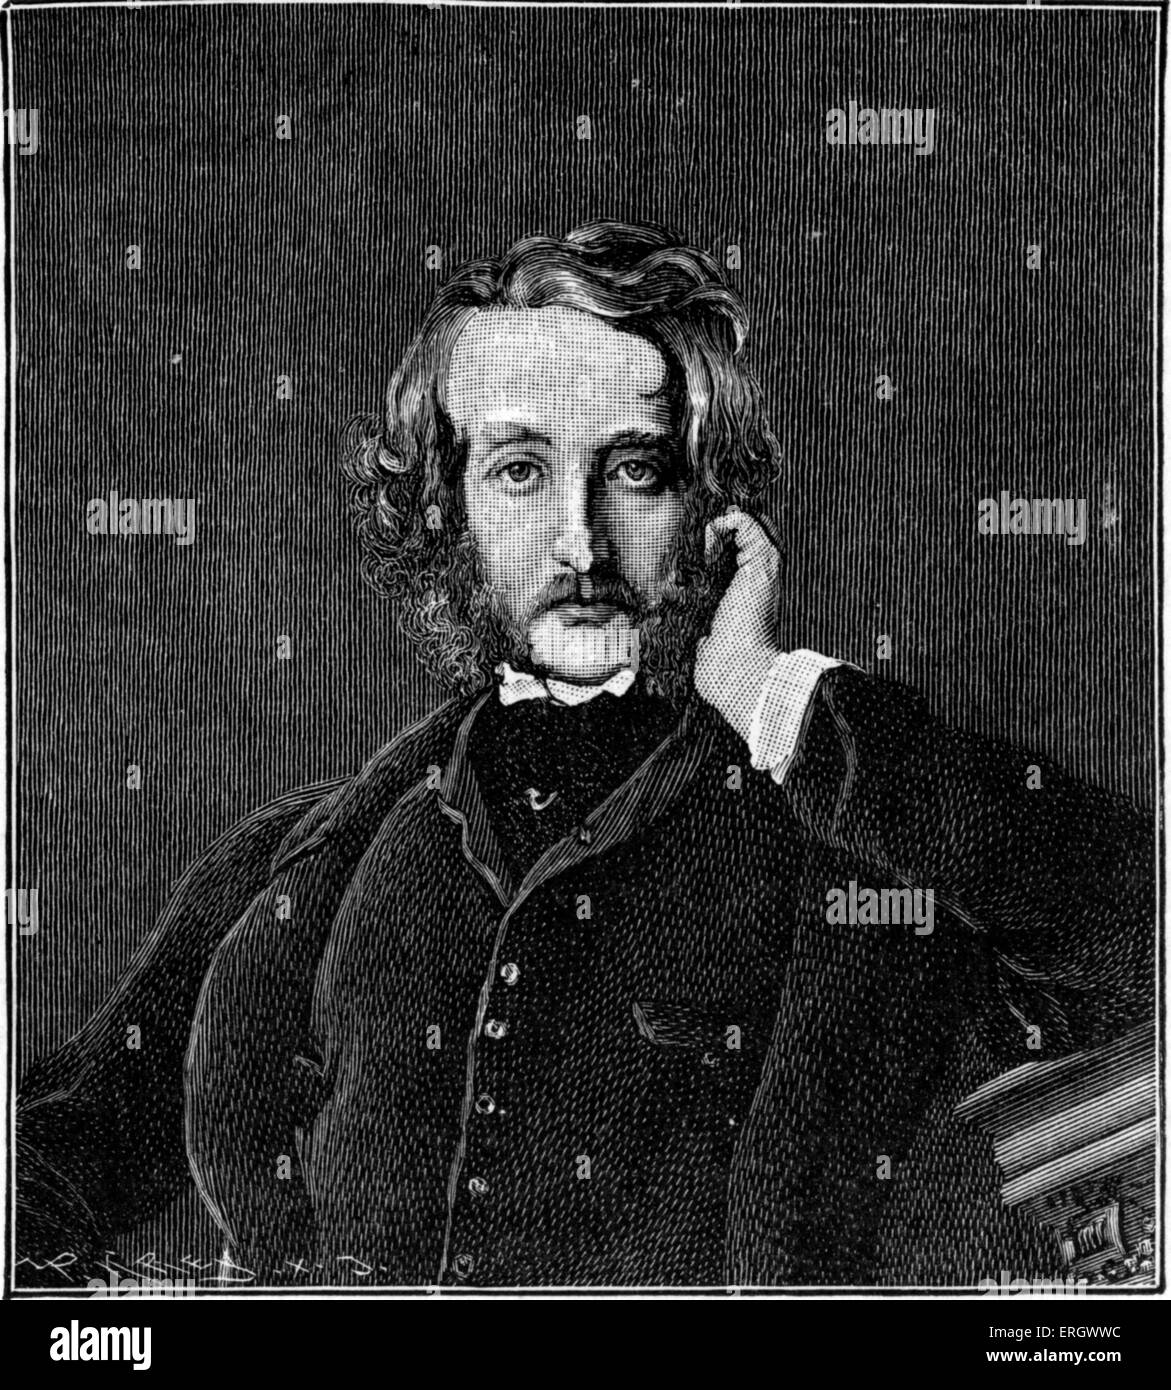 Edward Bulwer-Lytton (1st Baron Lytton): English novelist, poet, playwright, and politician, 25 May 1803 – 18 January 1873. From an engraving pf the portrait by Daniel Maclise. Stock Photo